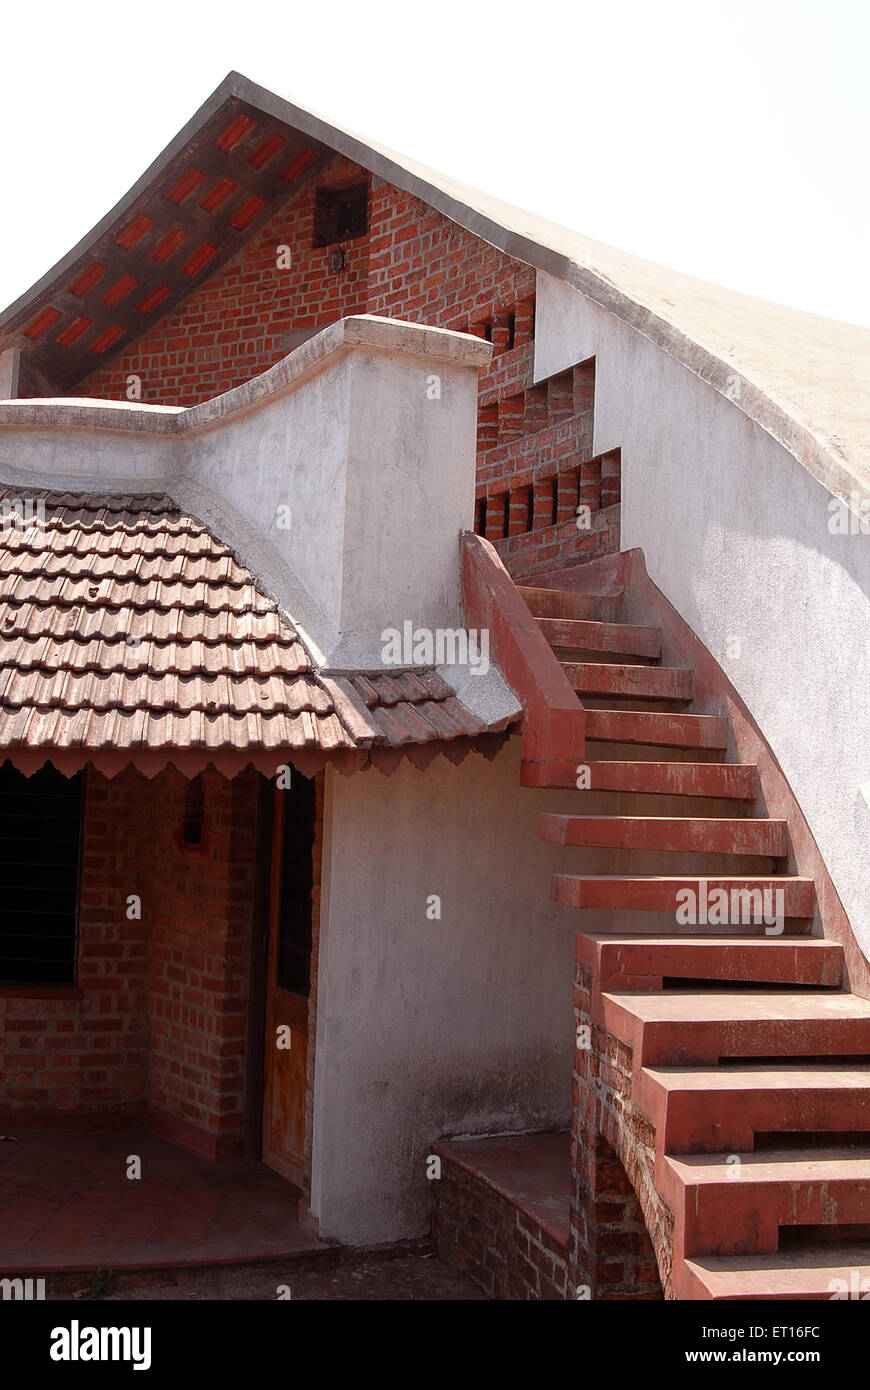 Stairs of brick wall house, India Stock Photo